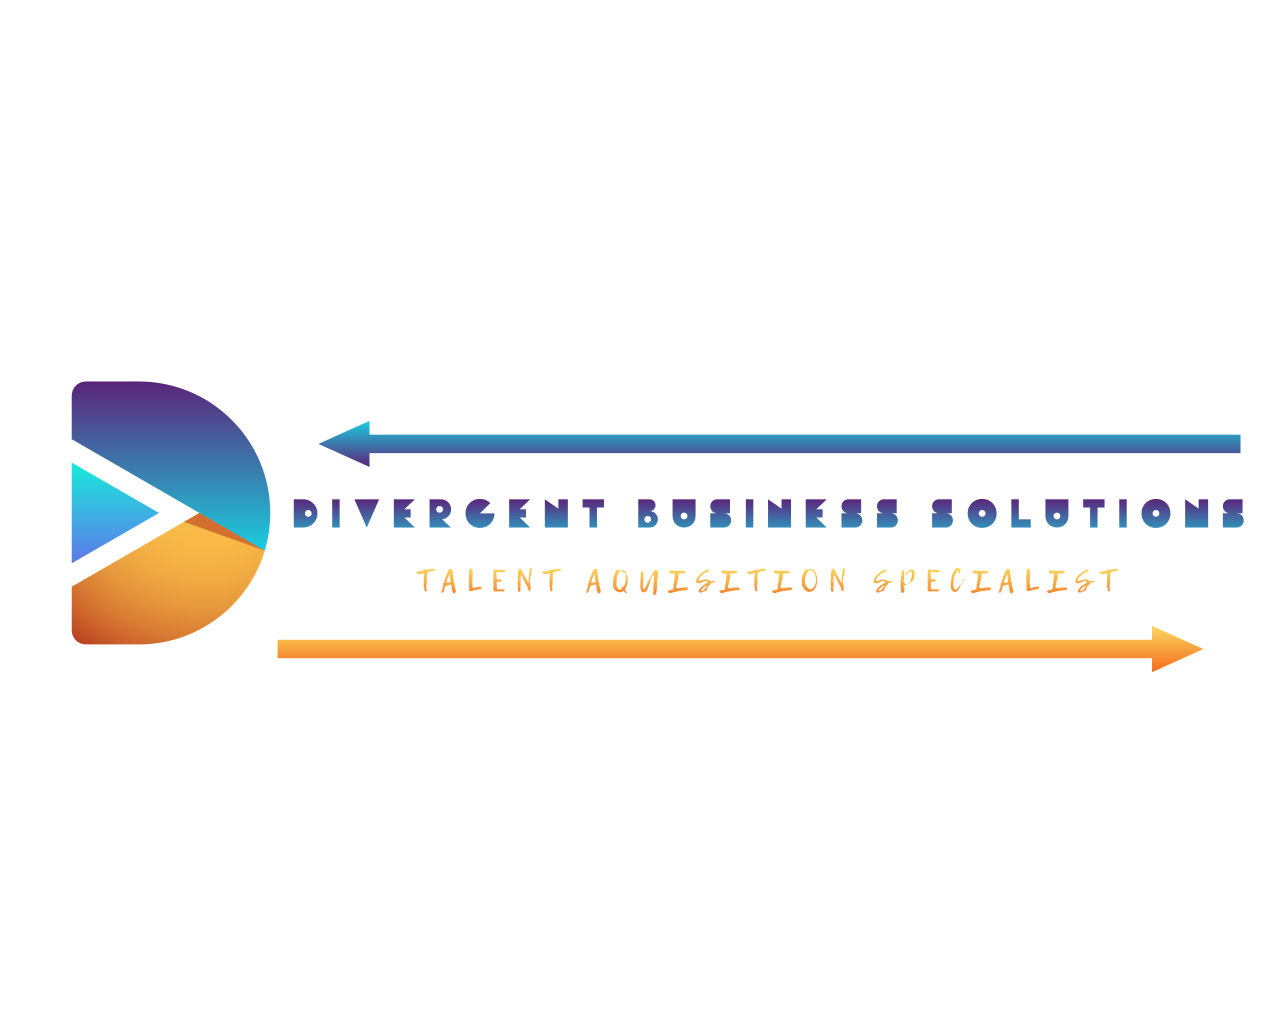 Divergent Business Solutions 's web page